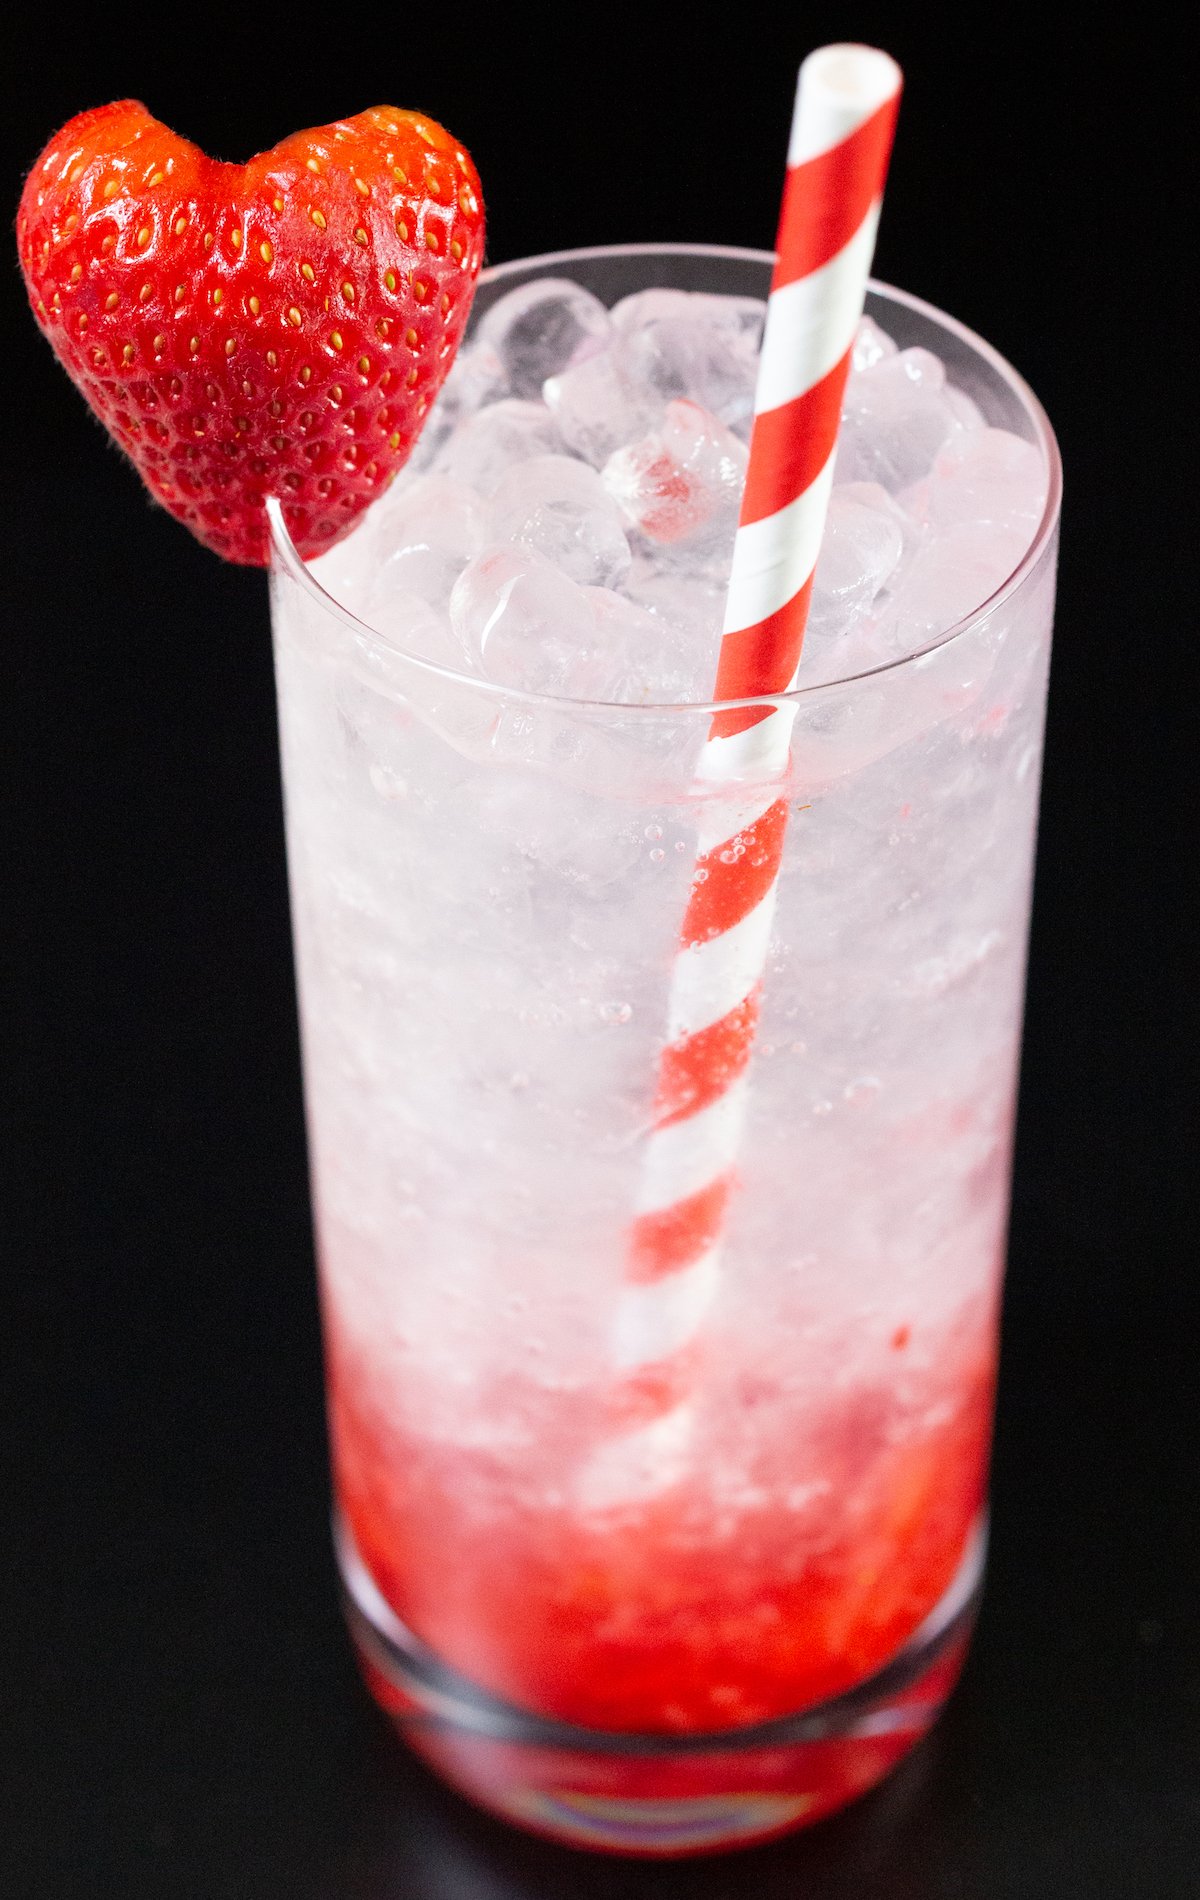 A highball glass filled with a strawberry gin smash that has muddles strawberries on the bottom and cum soda and pebble ice in the top part of the glass. Heart shaped strawberry and red & white paper straw garnish.